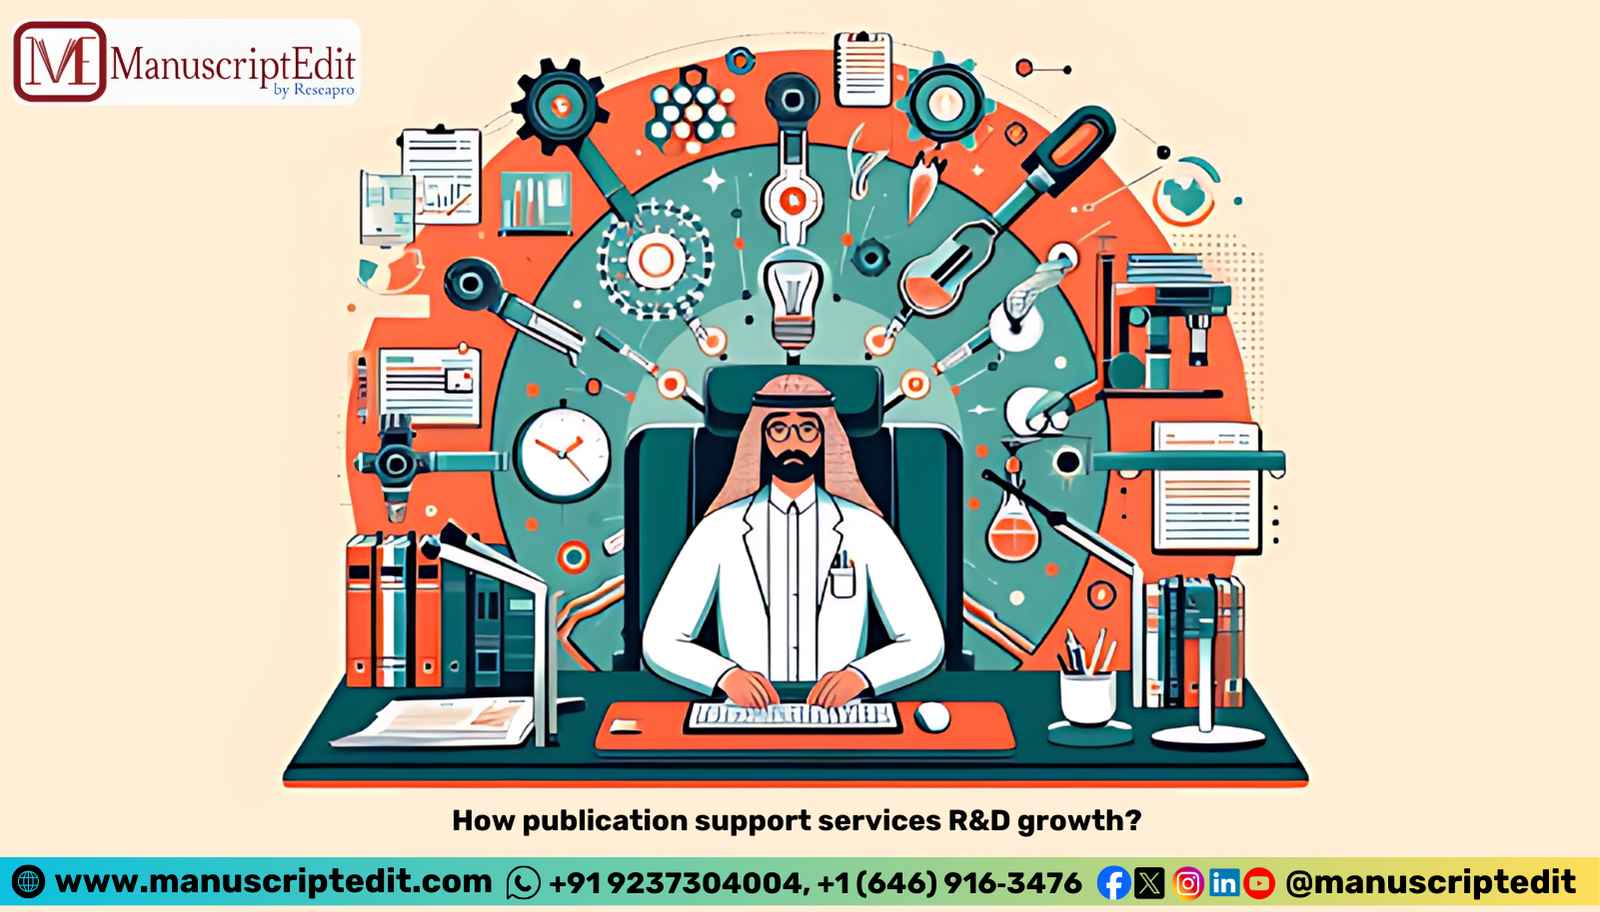 How Publication Support Services Help R&D growth